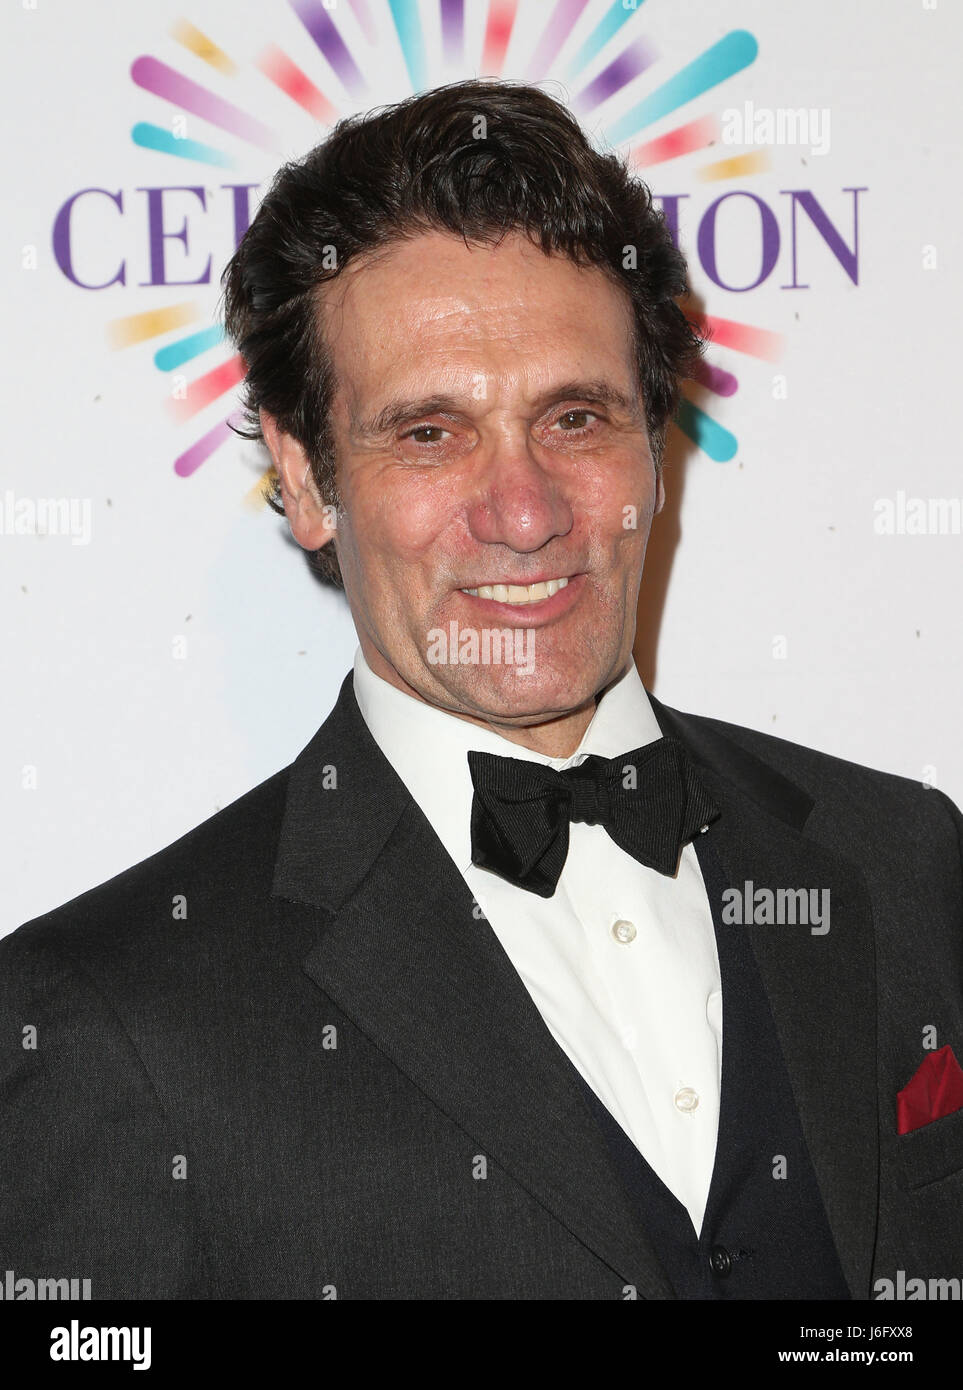 Los Angeles, Ca, USA. 20th May, 2017. Guest, At Center Theatre Group's 50th Anniversary Celebration At Ahmanson Theatre In California on May 20, 2017. Credit: Fs/Media Punch/Alamy Live News Stock Photo